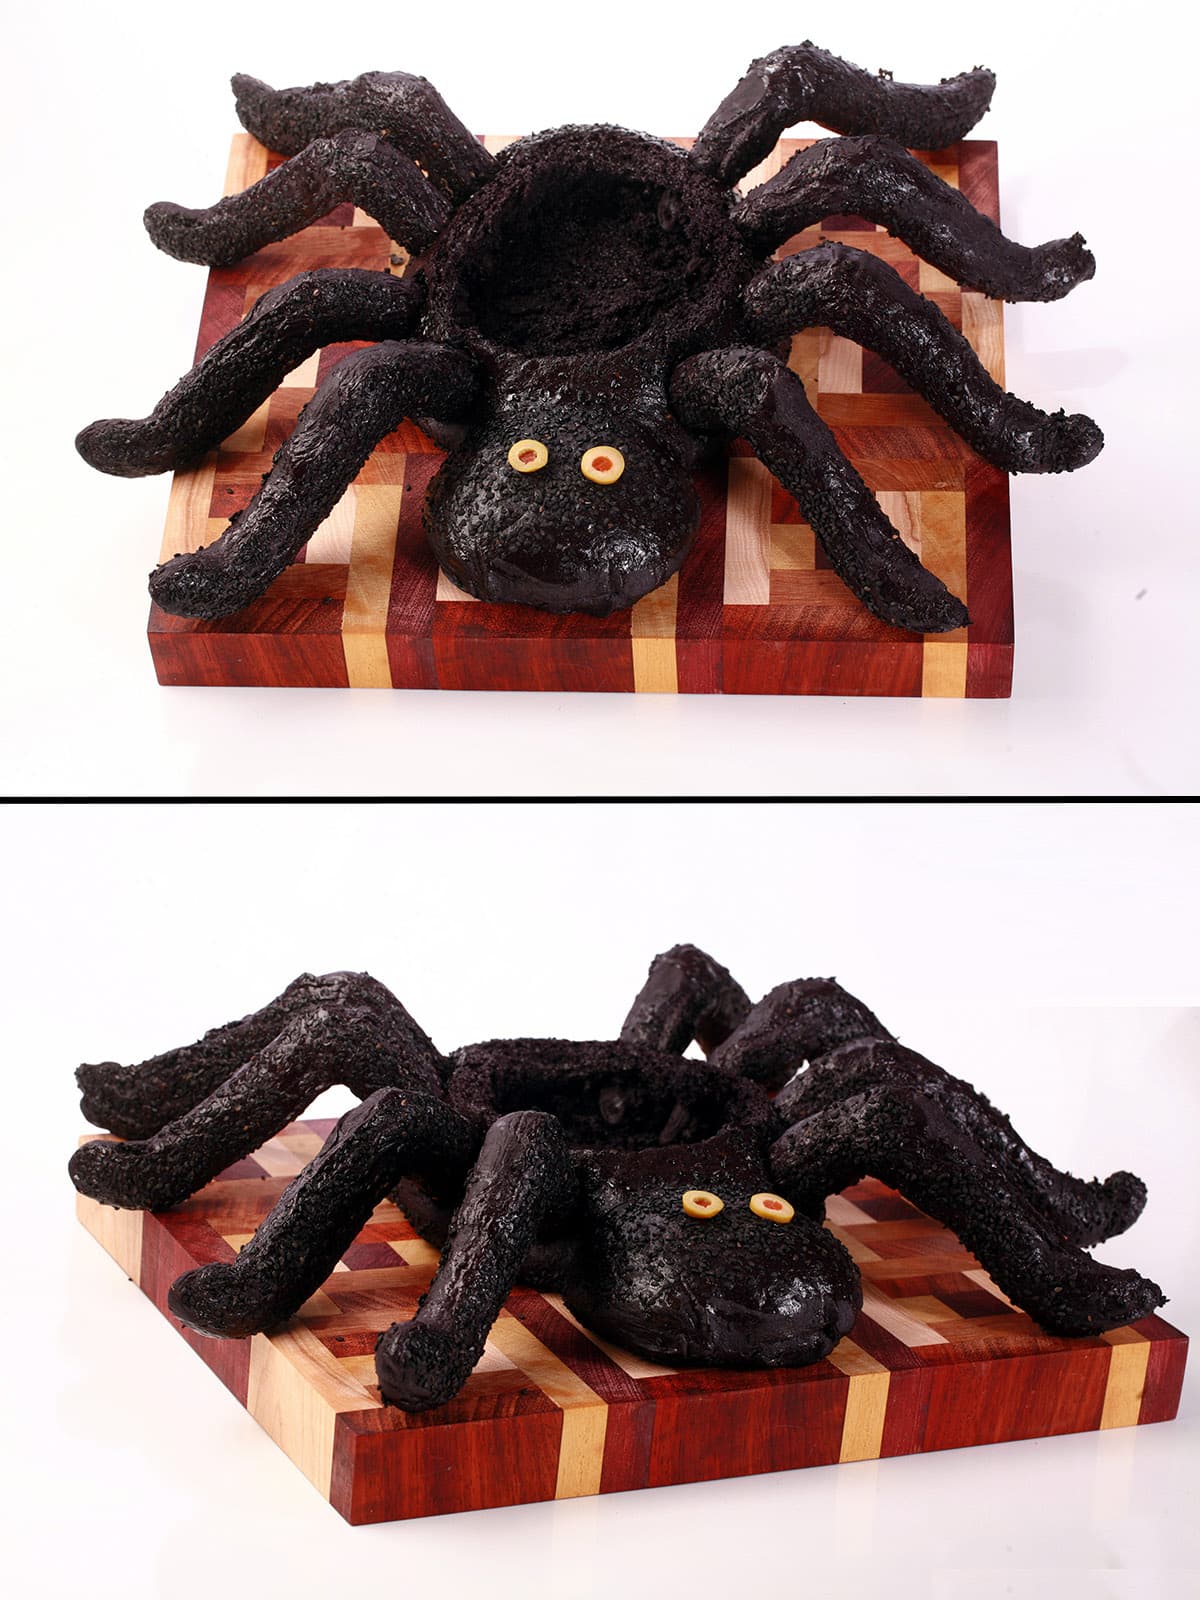 A 2 part image showing the completed spider bread bowl from front and overhead views.